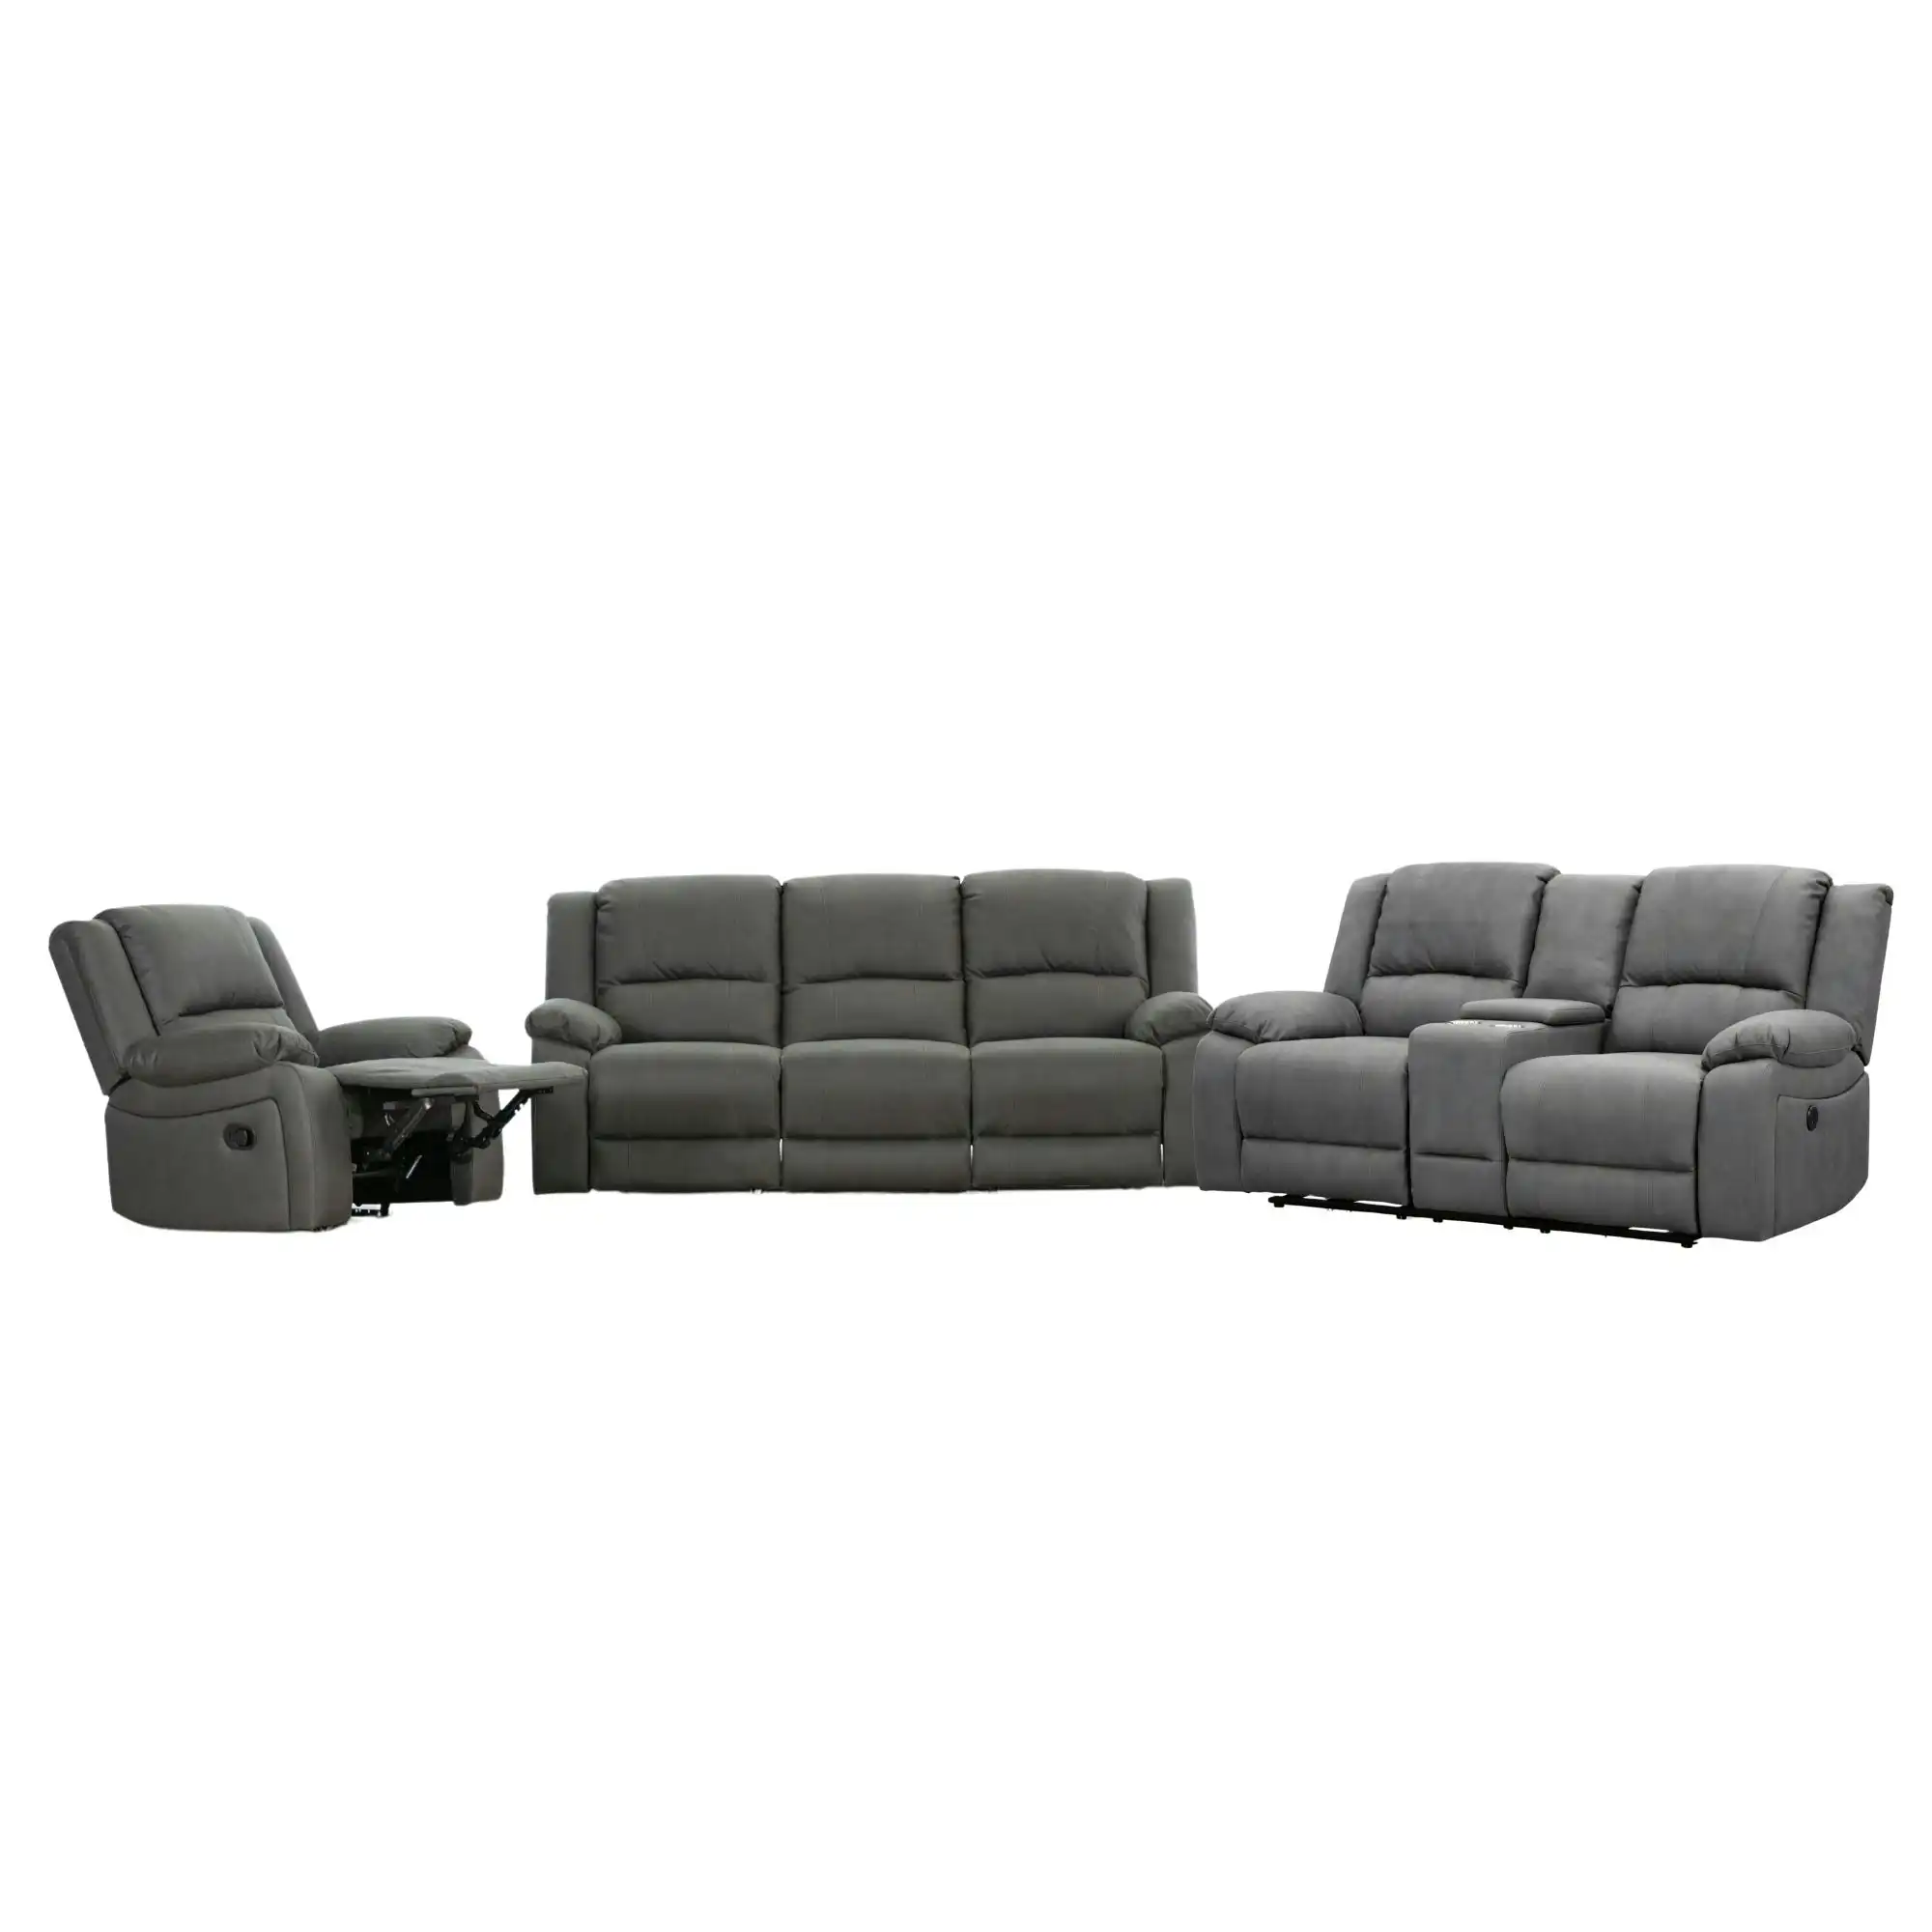 Anderson Fabric Electric Recliner Sofa Lounge Chair